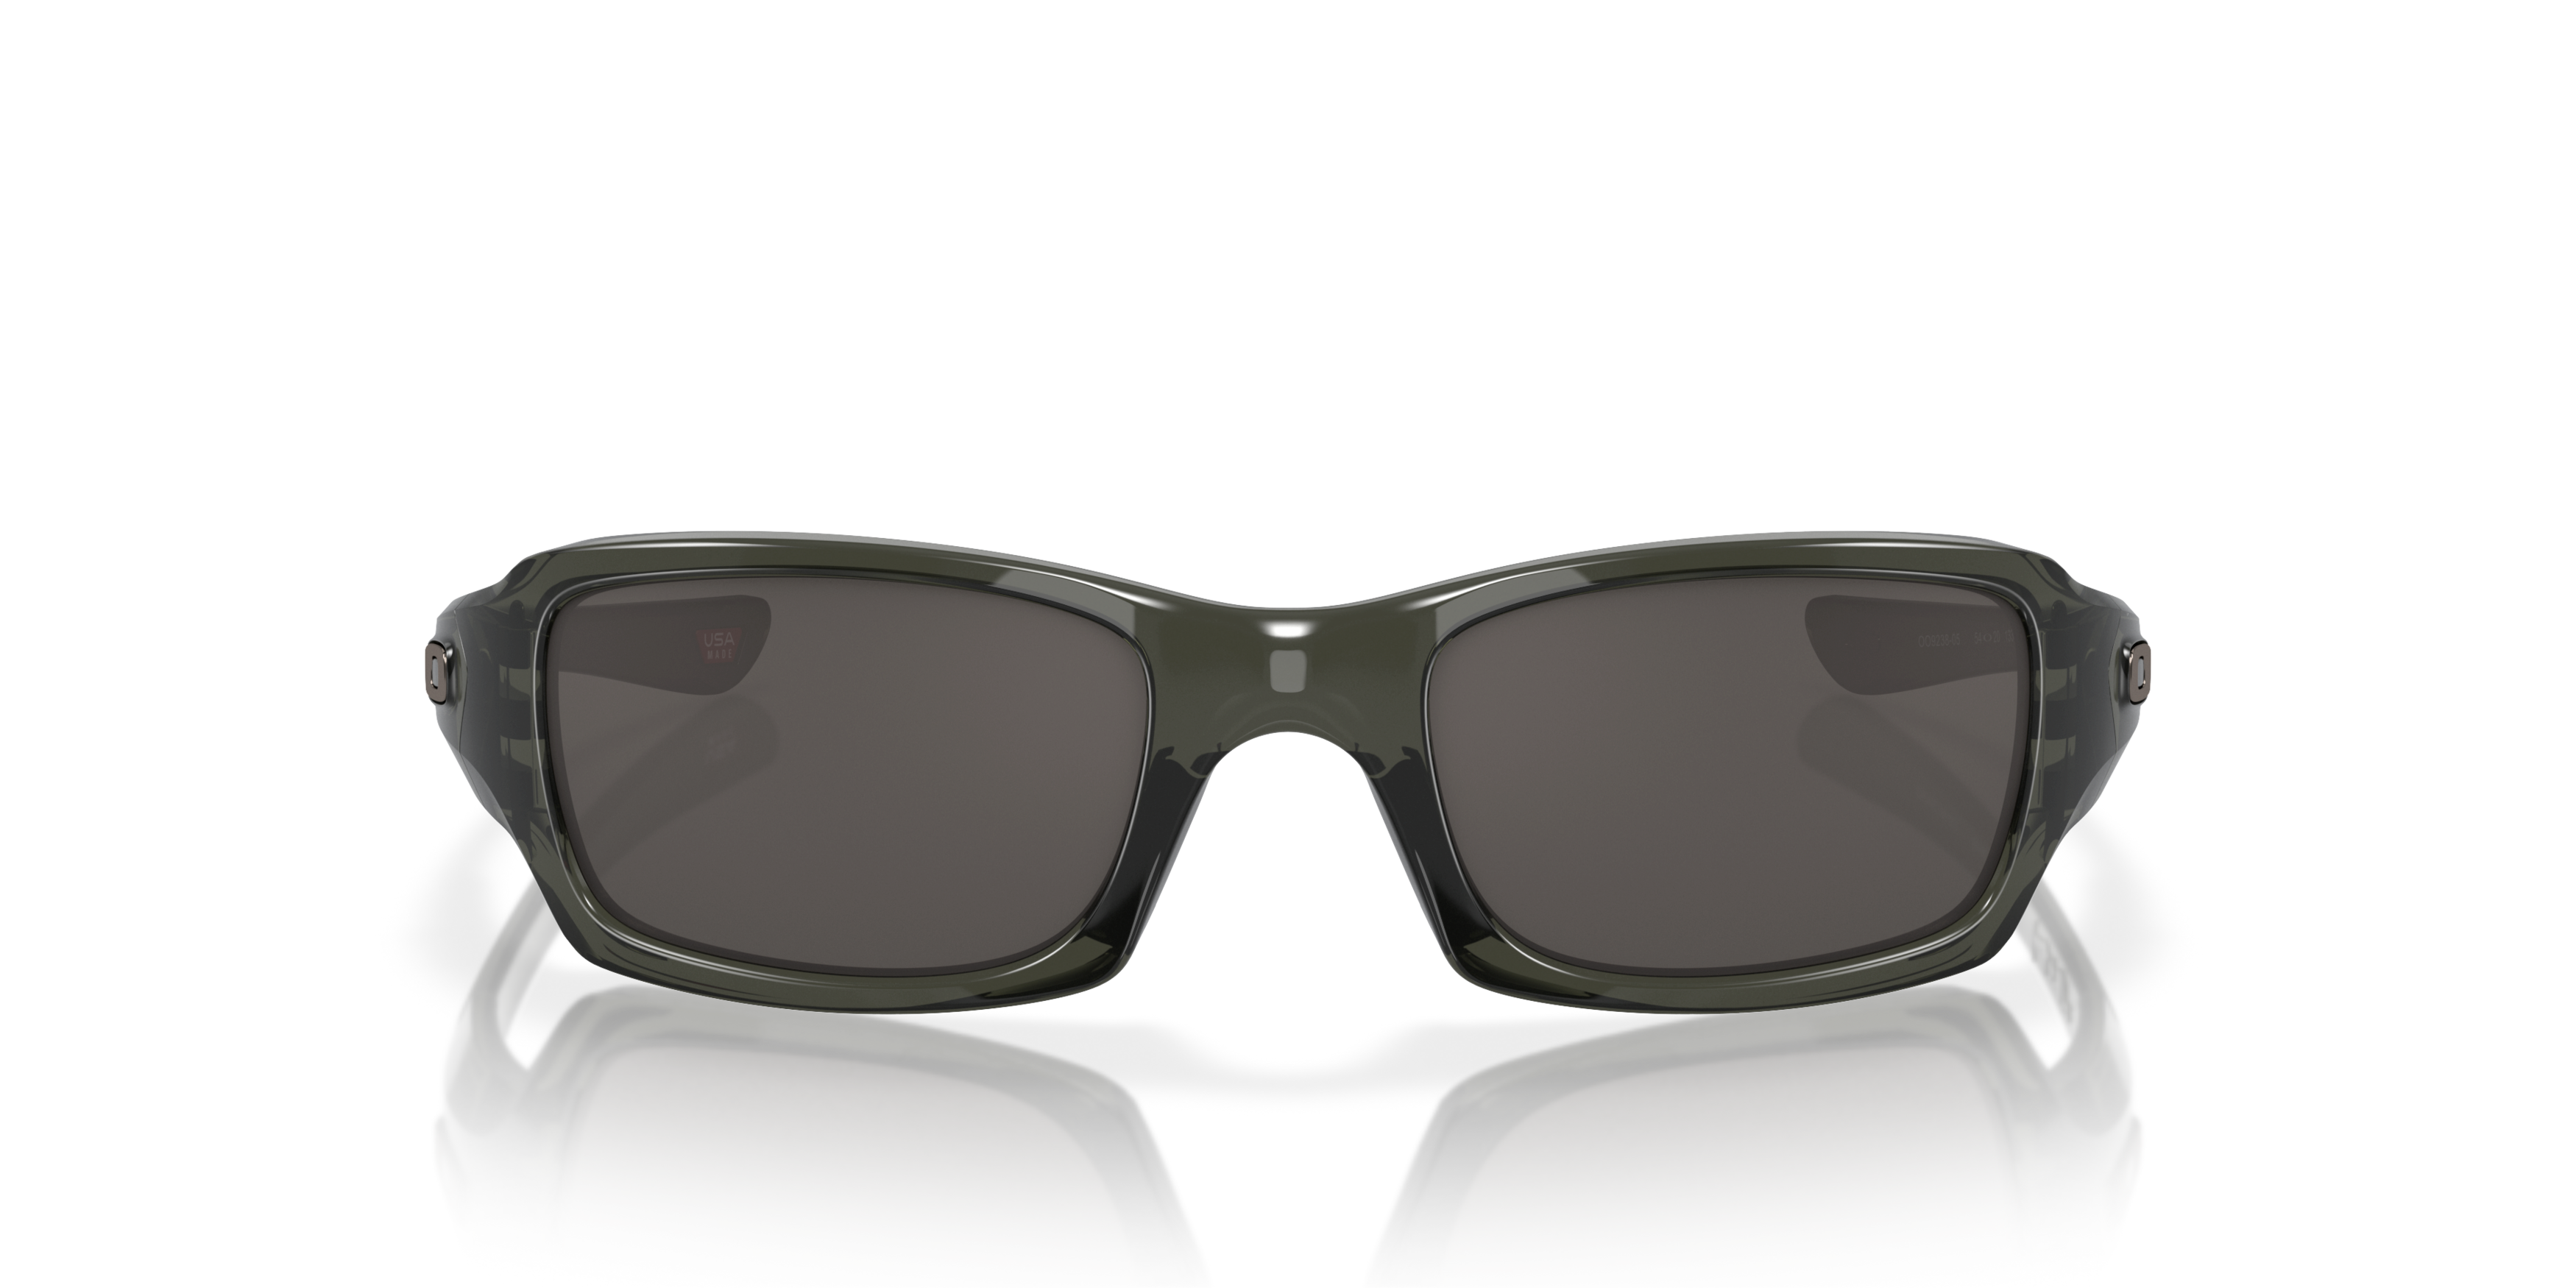 [products.image.front] OAKLEY FIVES SQUARED OO9238 923805